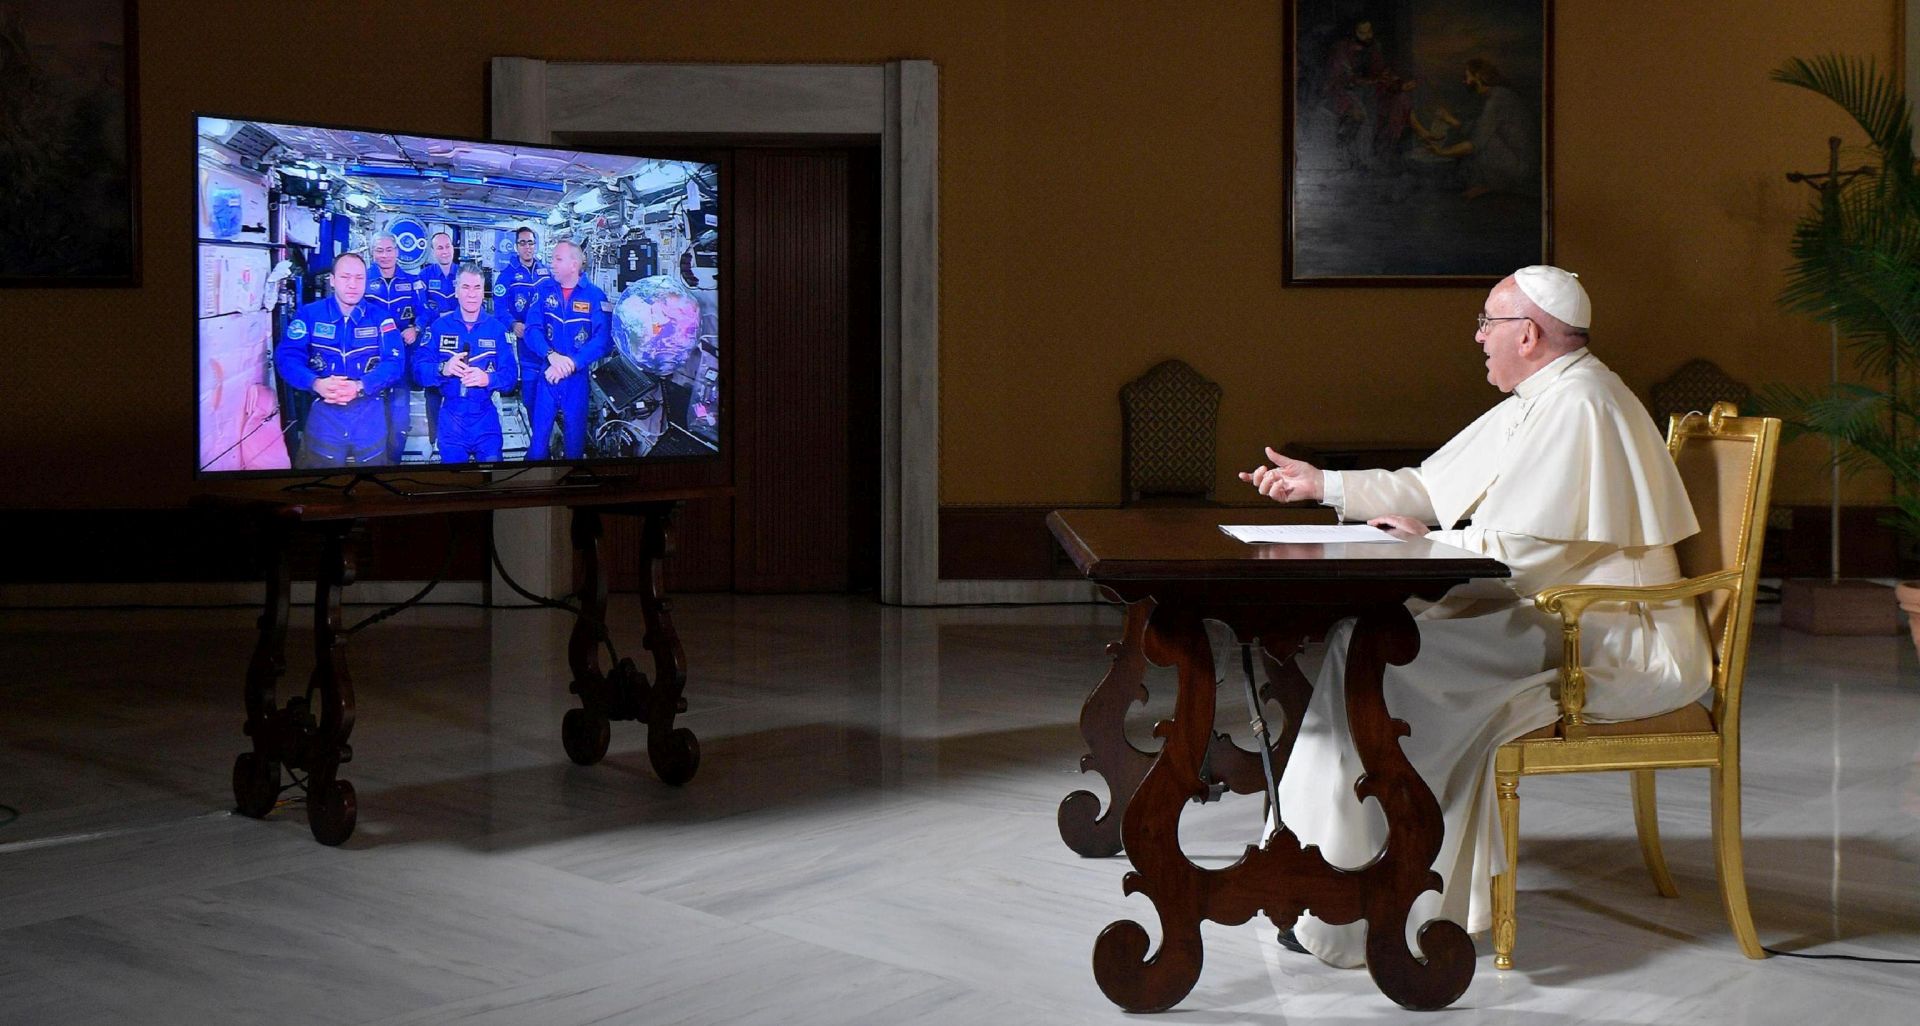 epa06290907 A handout picture provided by the Vatican newspaper L'Osservatore Romano on 26 October 2017 shows Pope Francis (R) communicating by a live audiovisual connection with the crew of Mission 53 (L, on screen) aboard the International Space Station (ISS), in flight some 400 kilometers above the Earth, at the Vatican, Vatican City, 26 October 2017.  EPA/OSSERVATORE ROMANO/HANDOUT  HANDOUT EDITORIAL USE ONLY/NO SALES